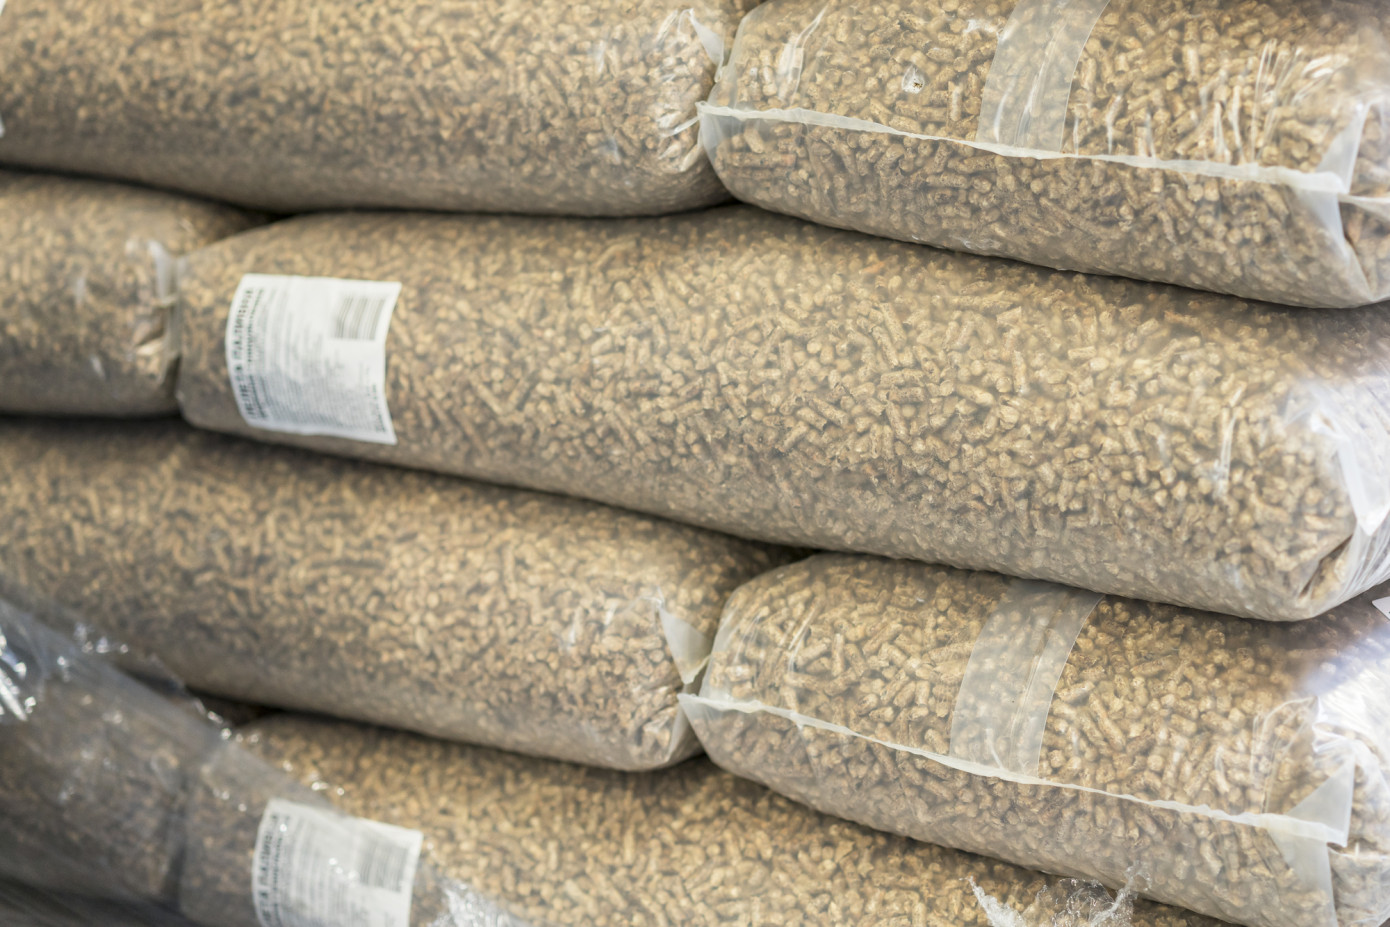 Imports of wood pellets to South Korea grow 38% in October